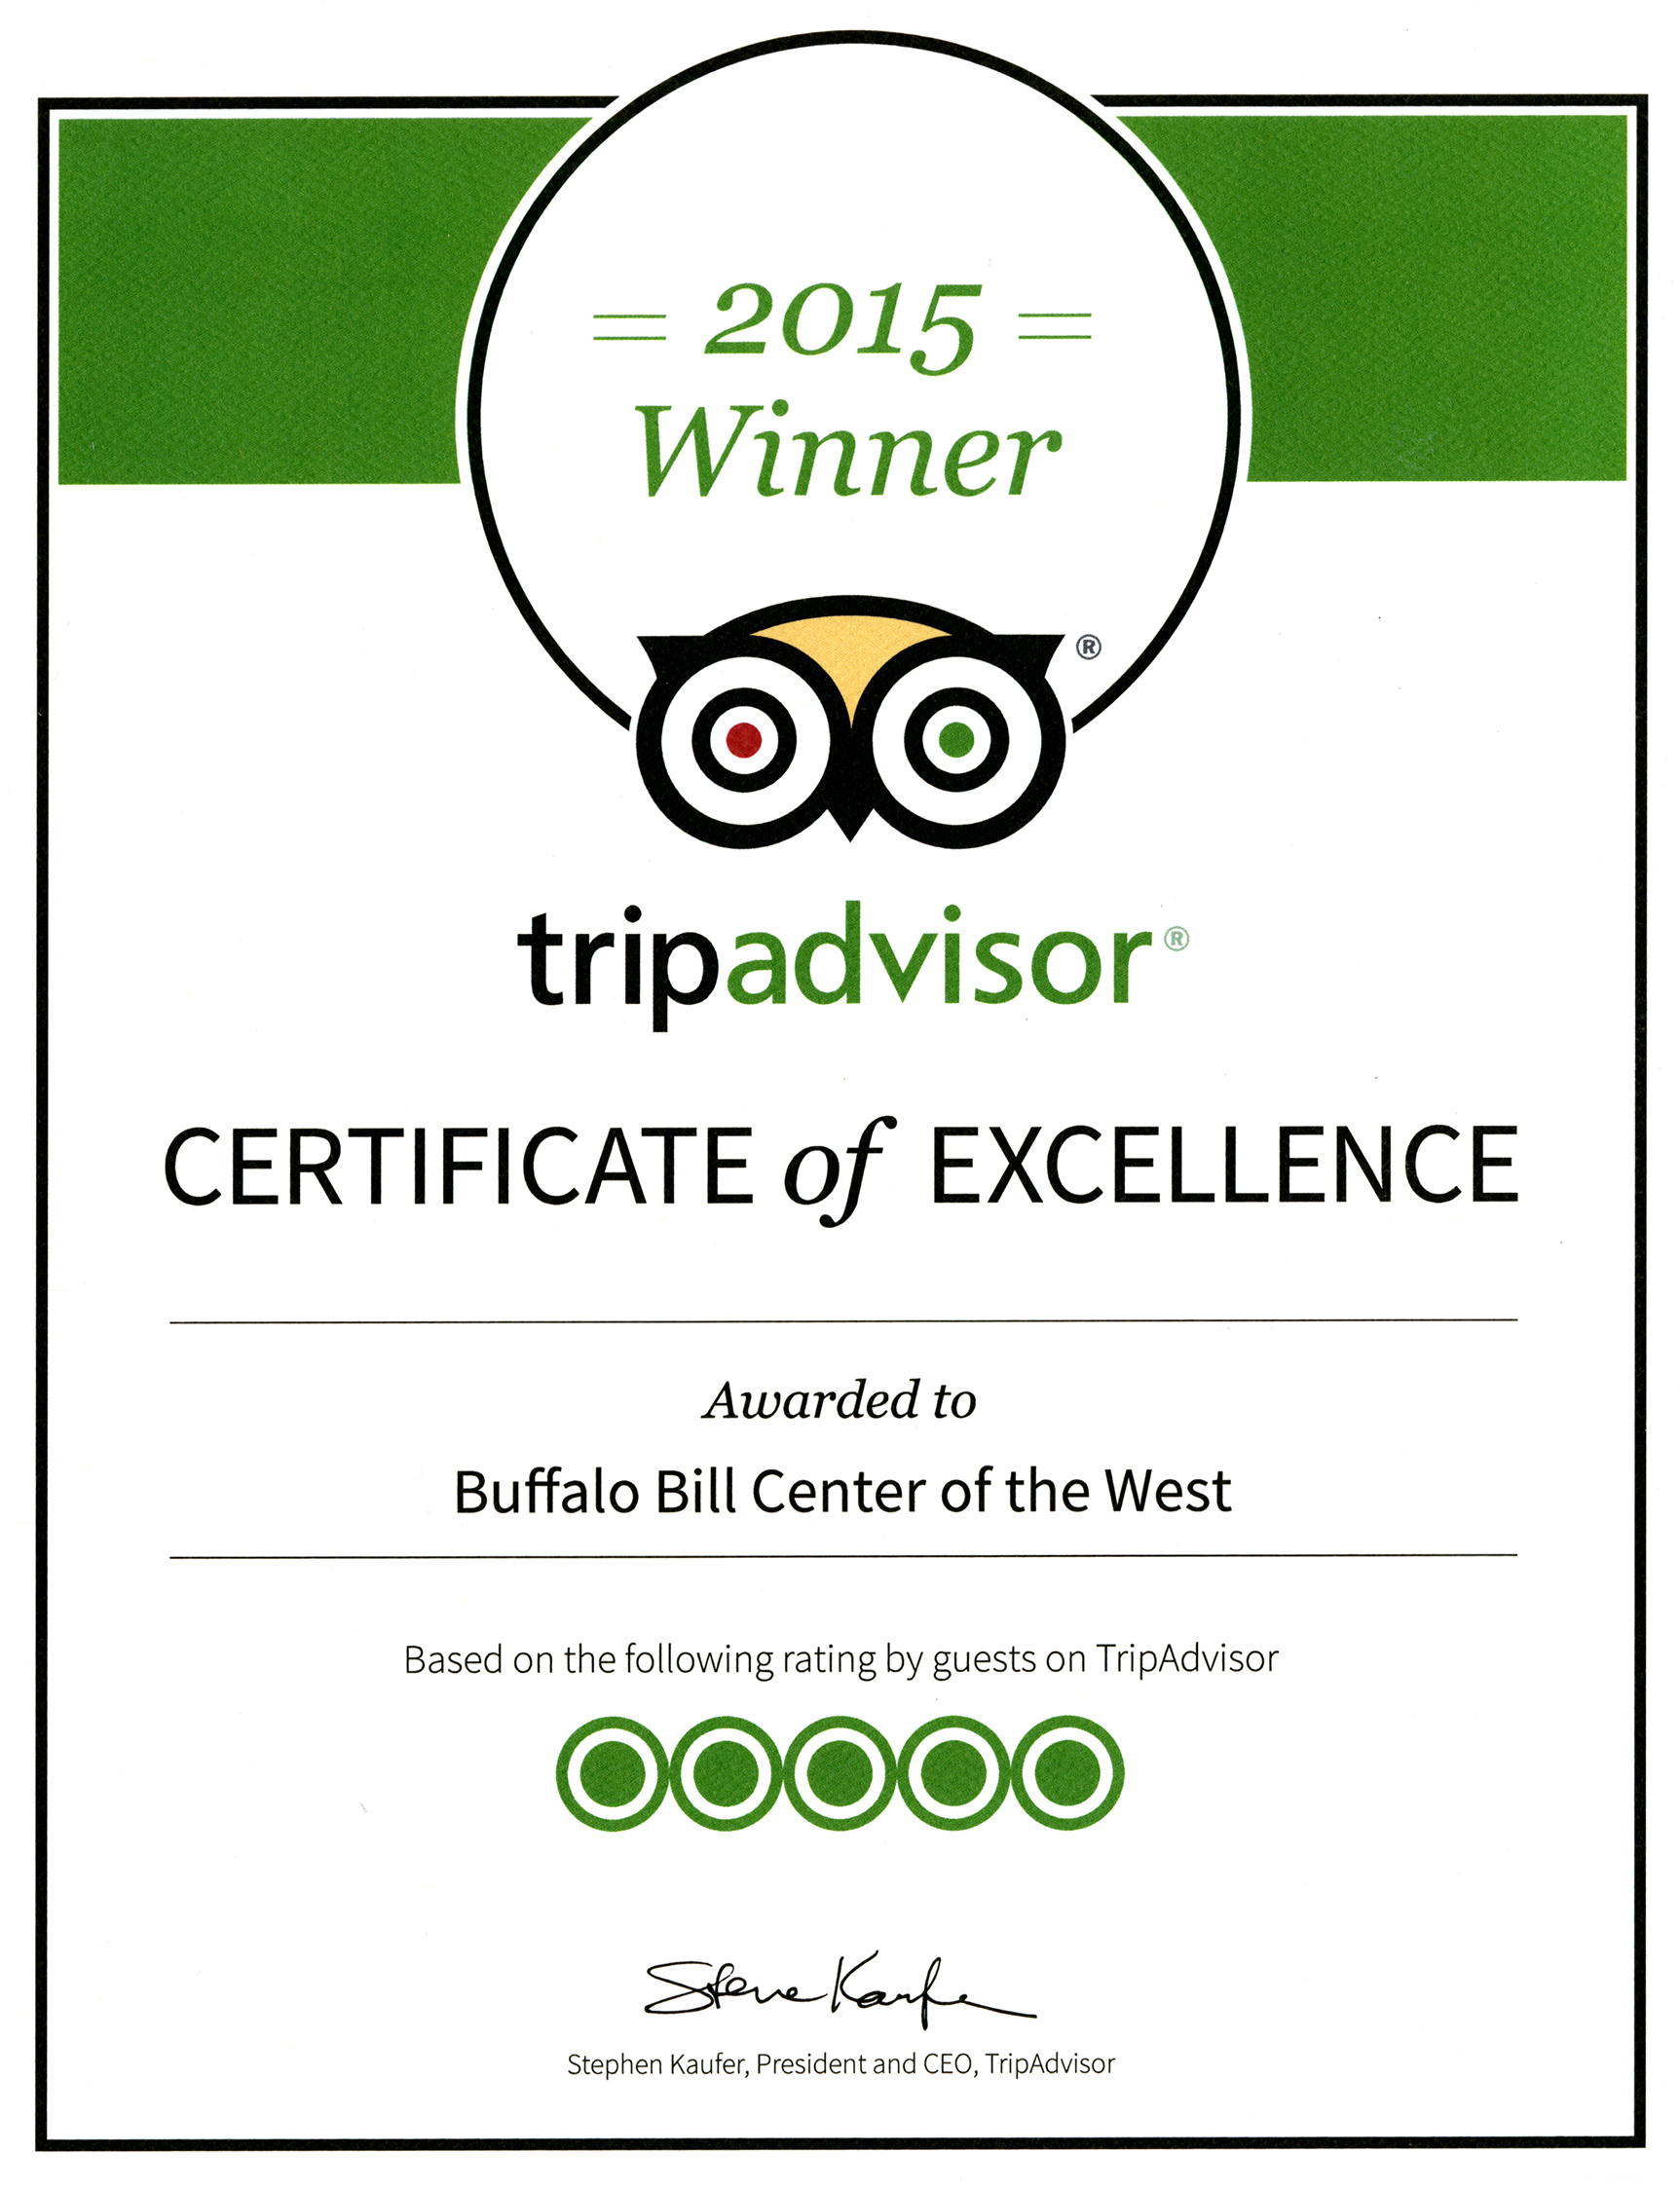 The Buffalo Bill Center of the West has won the Trip Advisor Certificate of Excellence for the third year in a row.